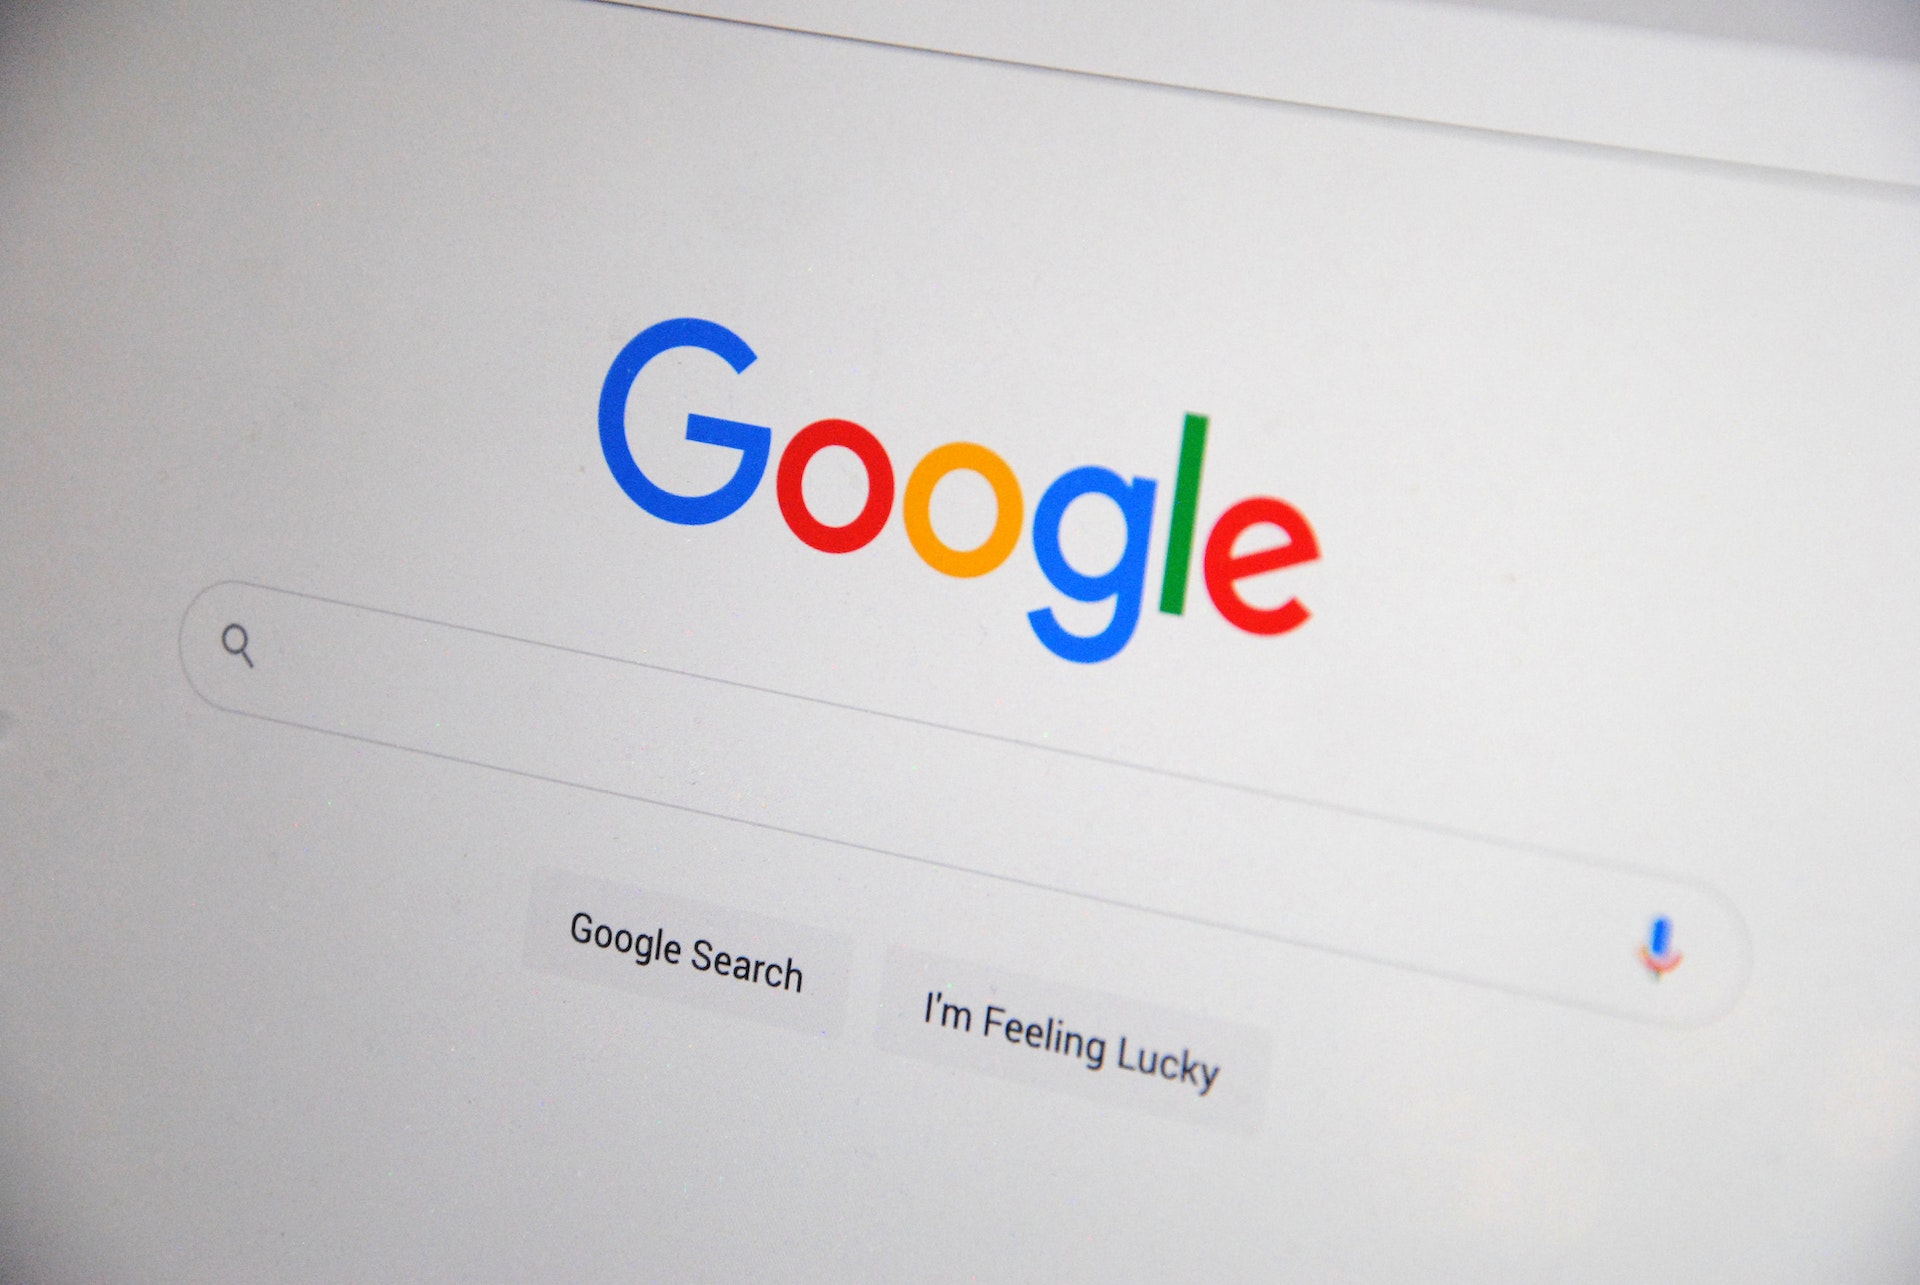 Google’s New Focus on Helpful Content Shakes up Digital Marketing’s Go-to SEO Playbook